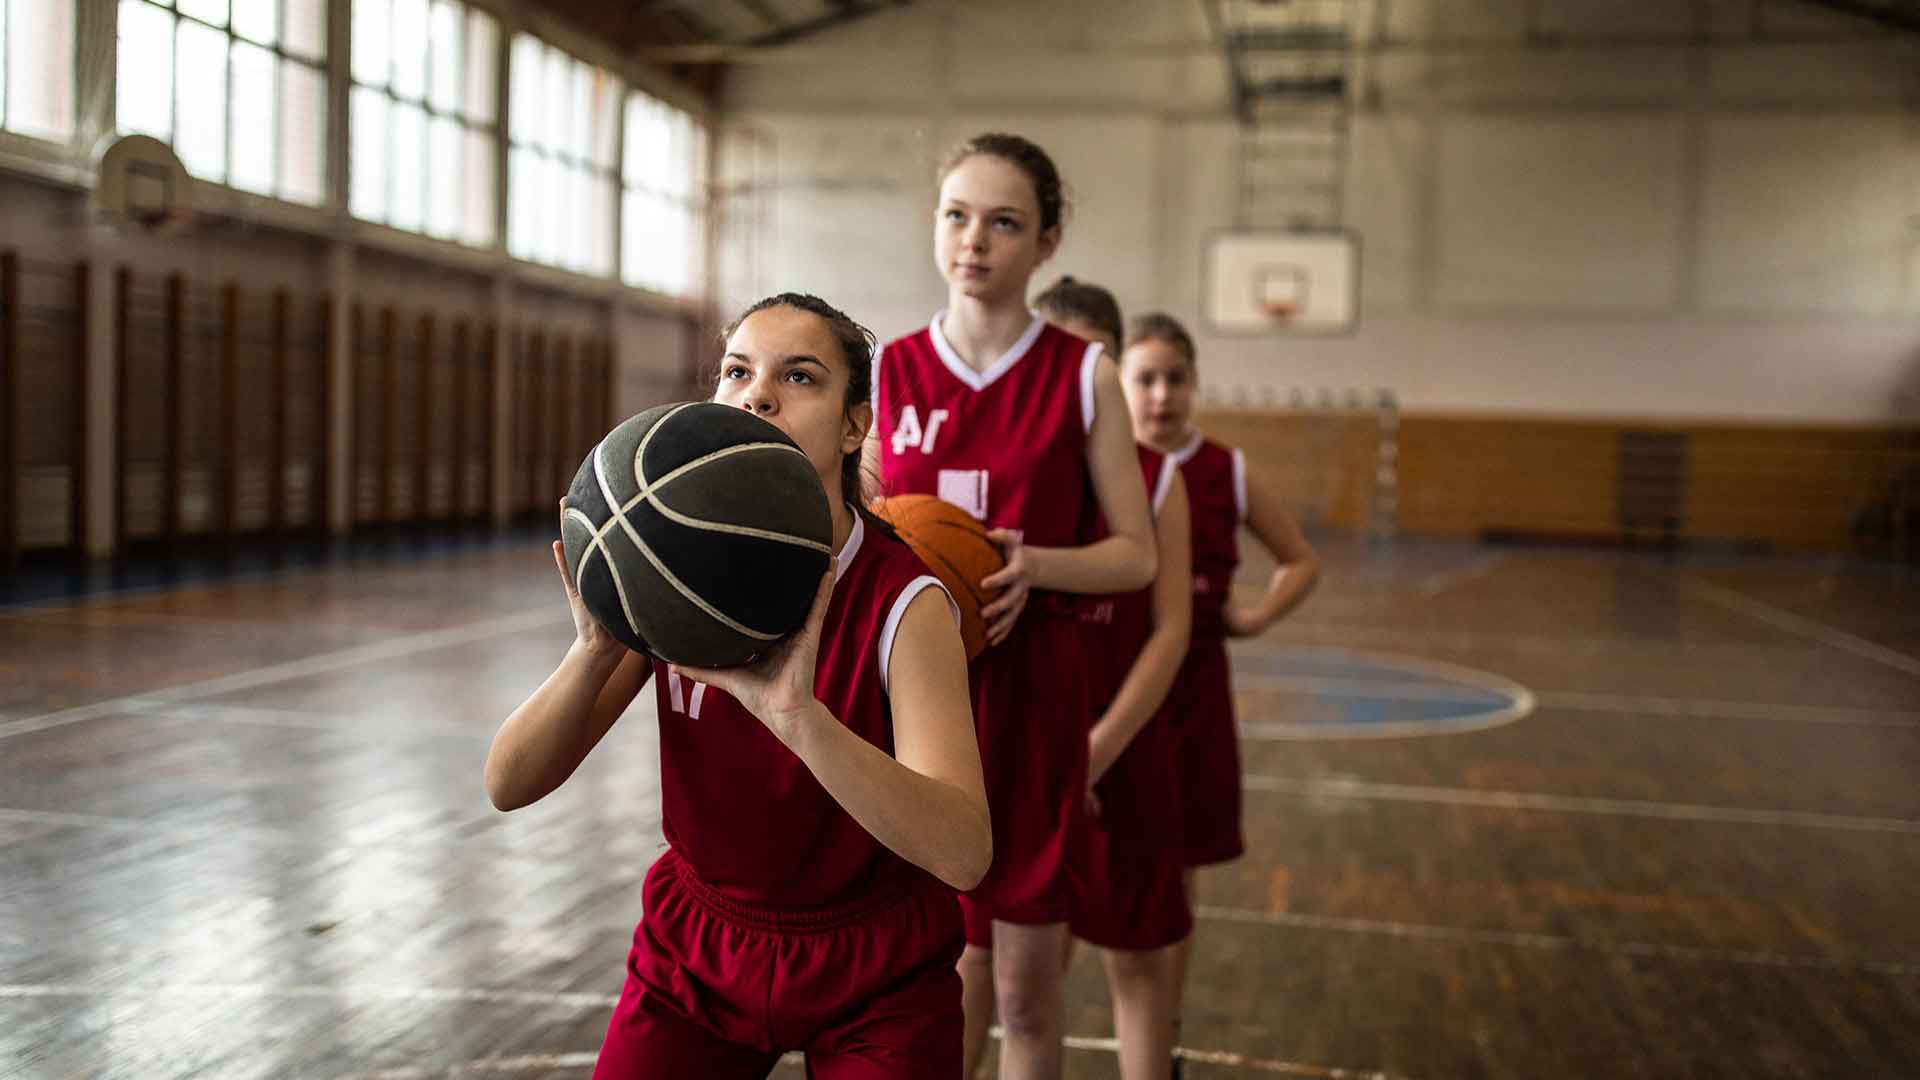 Girls in red jerseys playing basketball